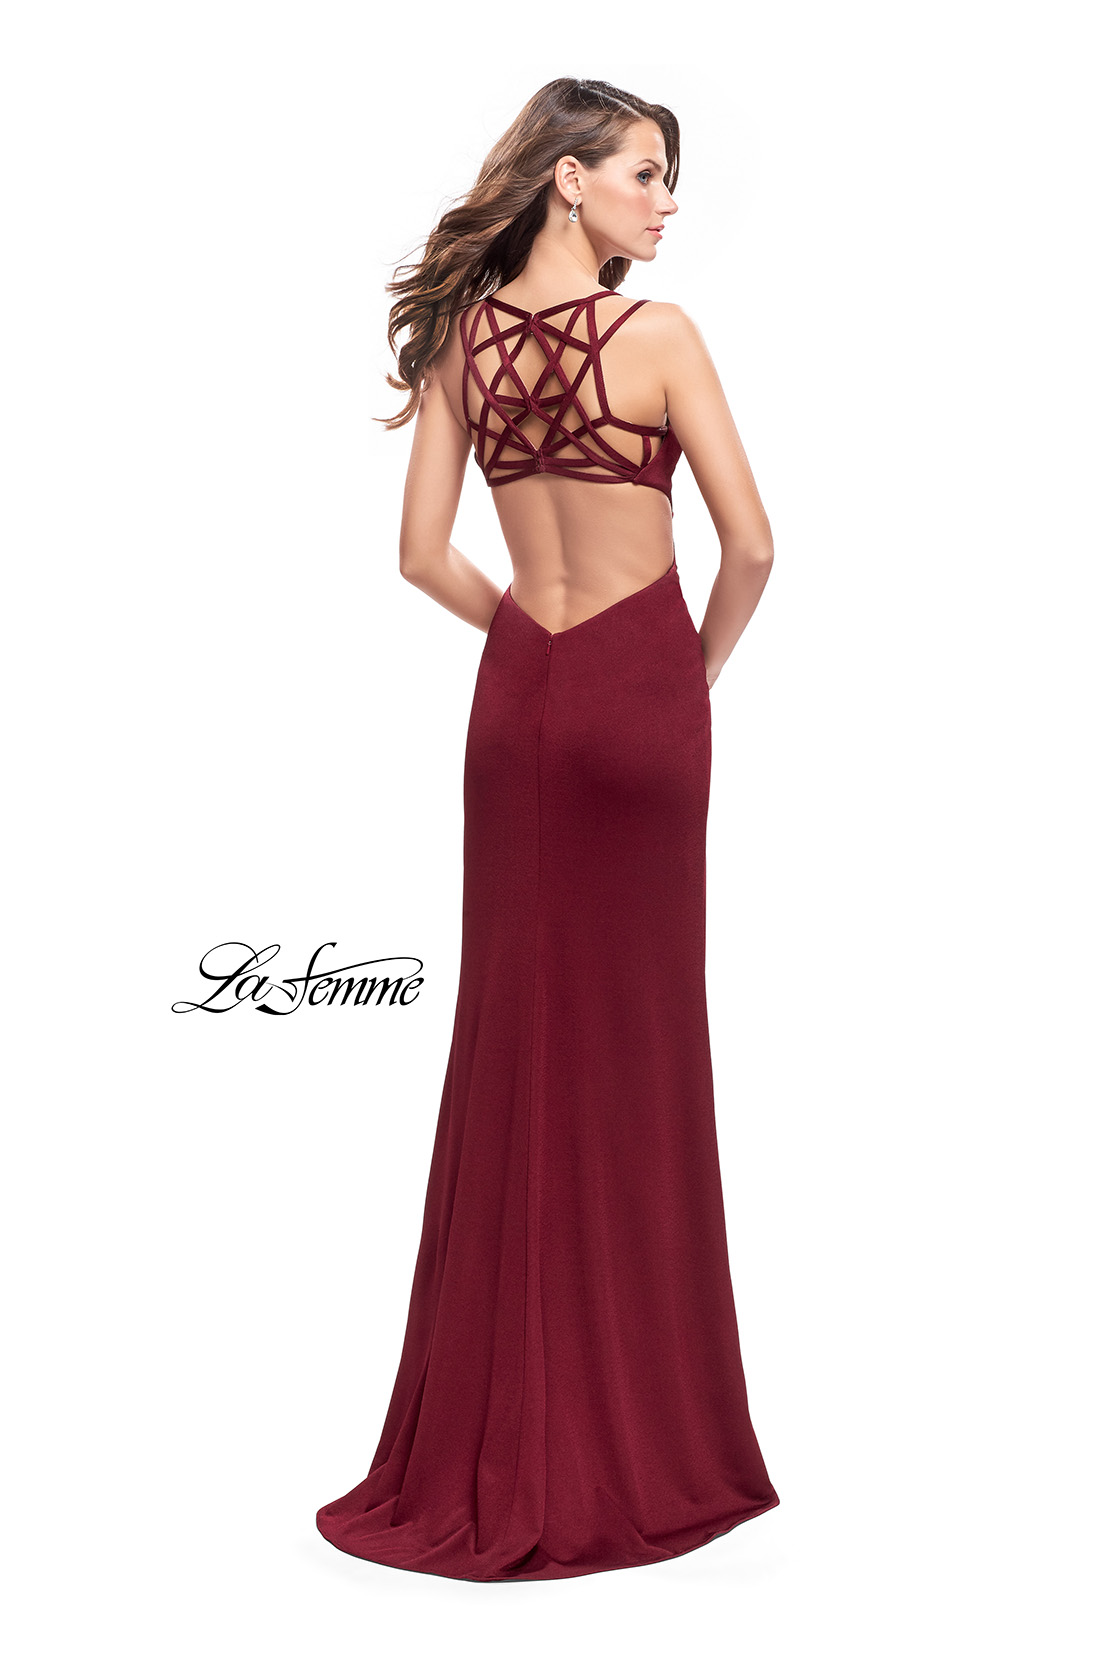 Burgundy Prom Dress with Strappy Back Design